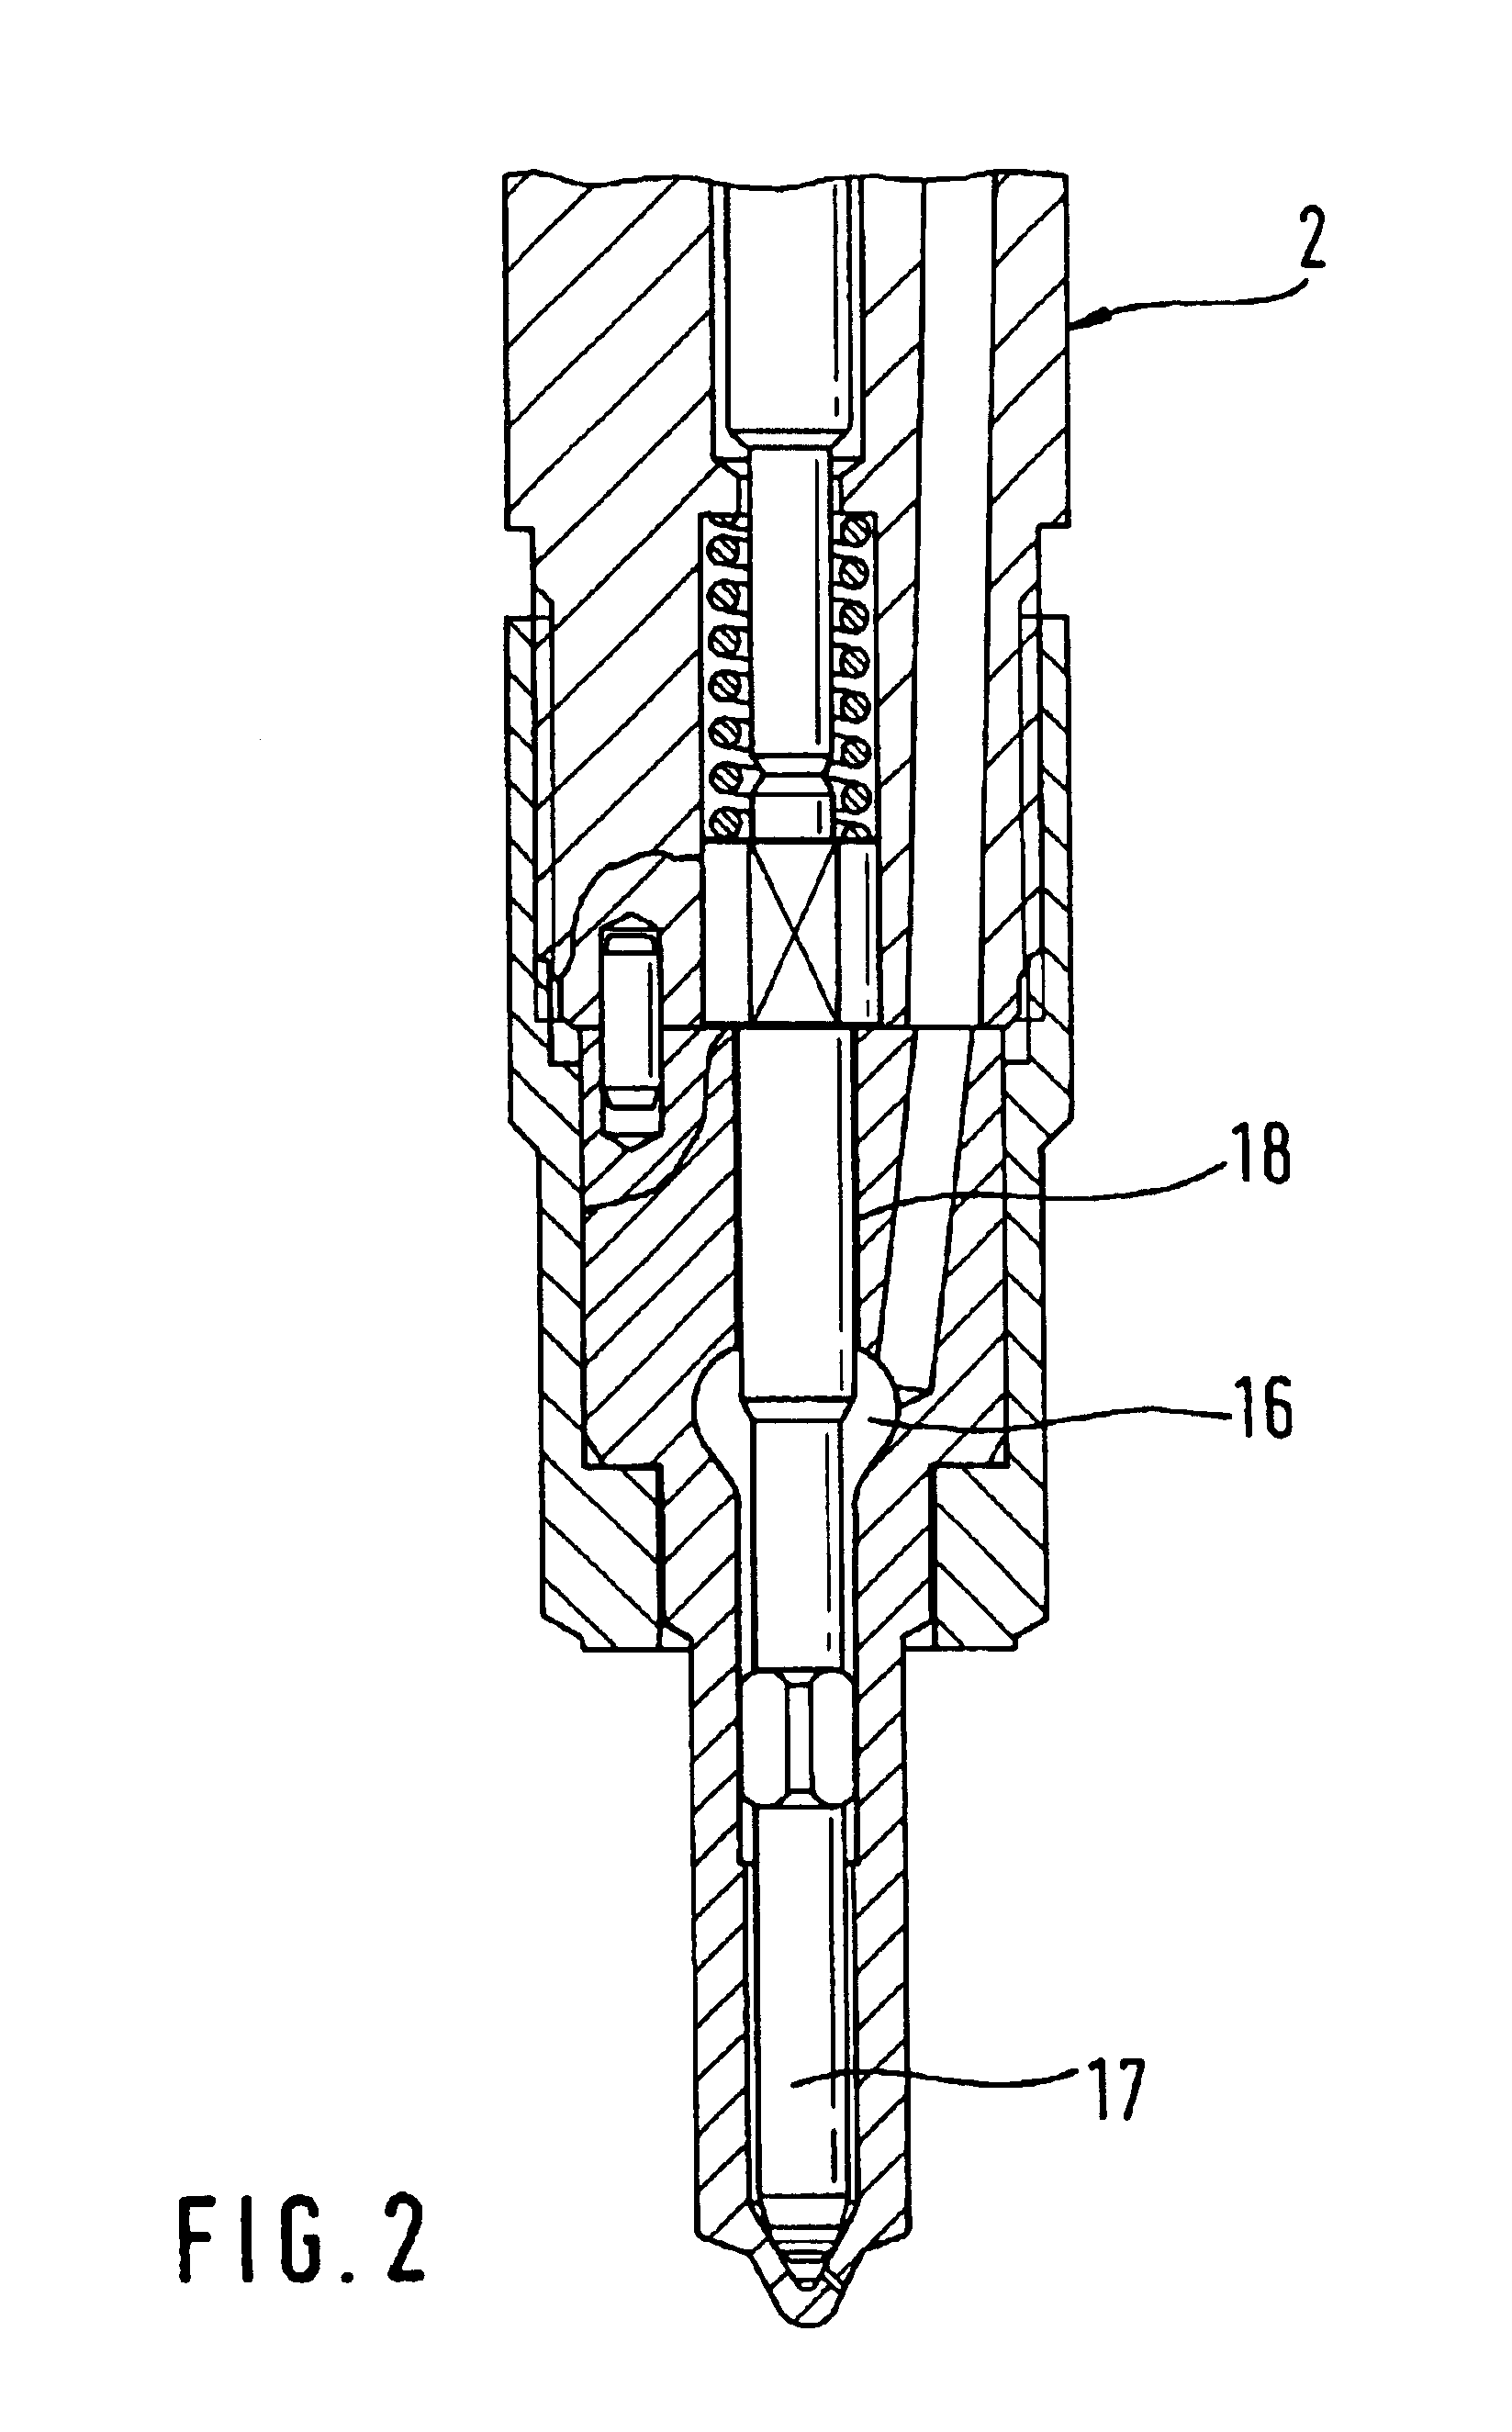 Injector with a magnet valve for controlling an injection valve